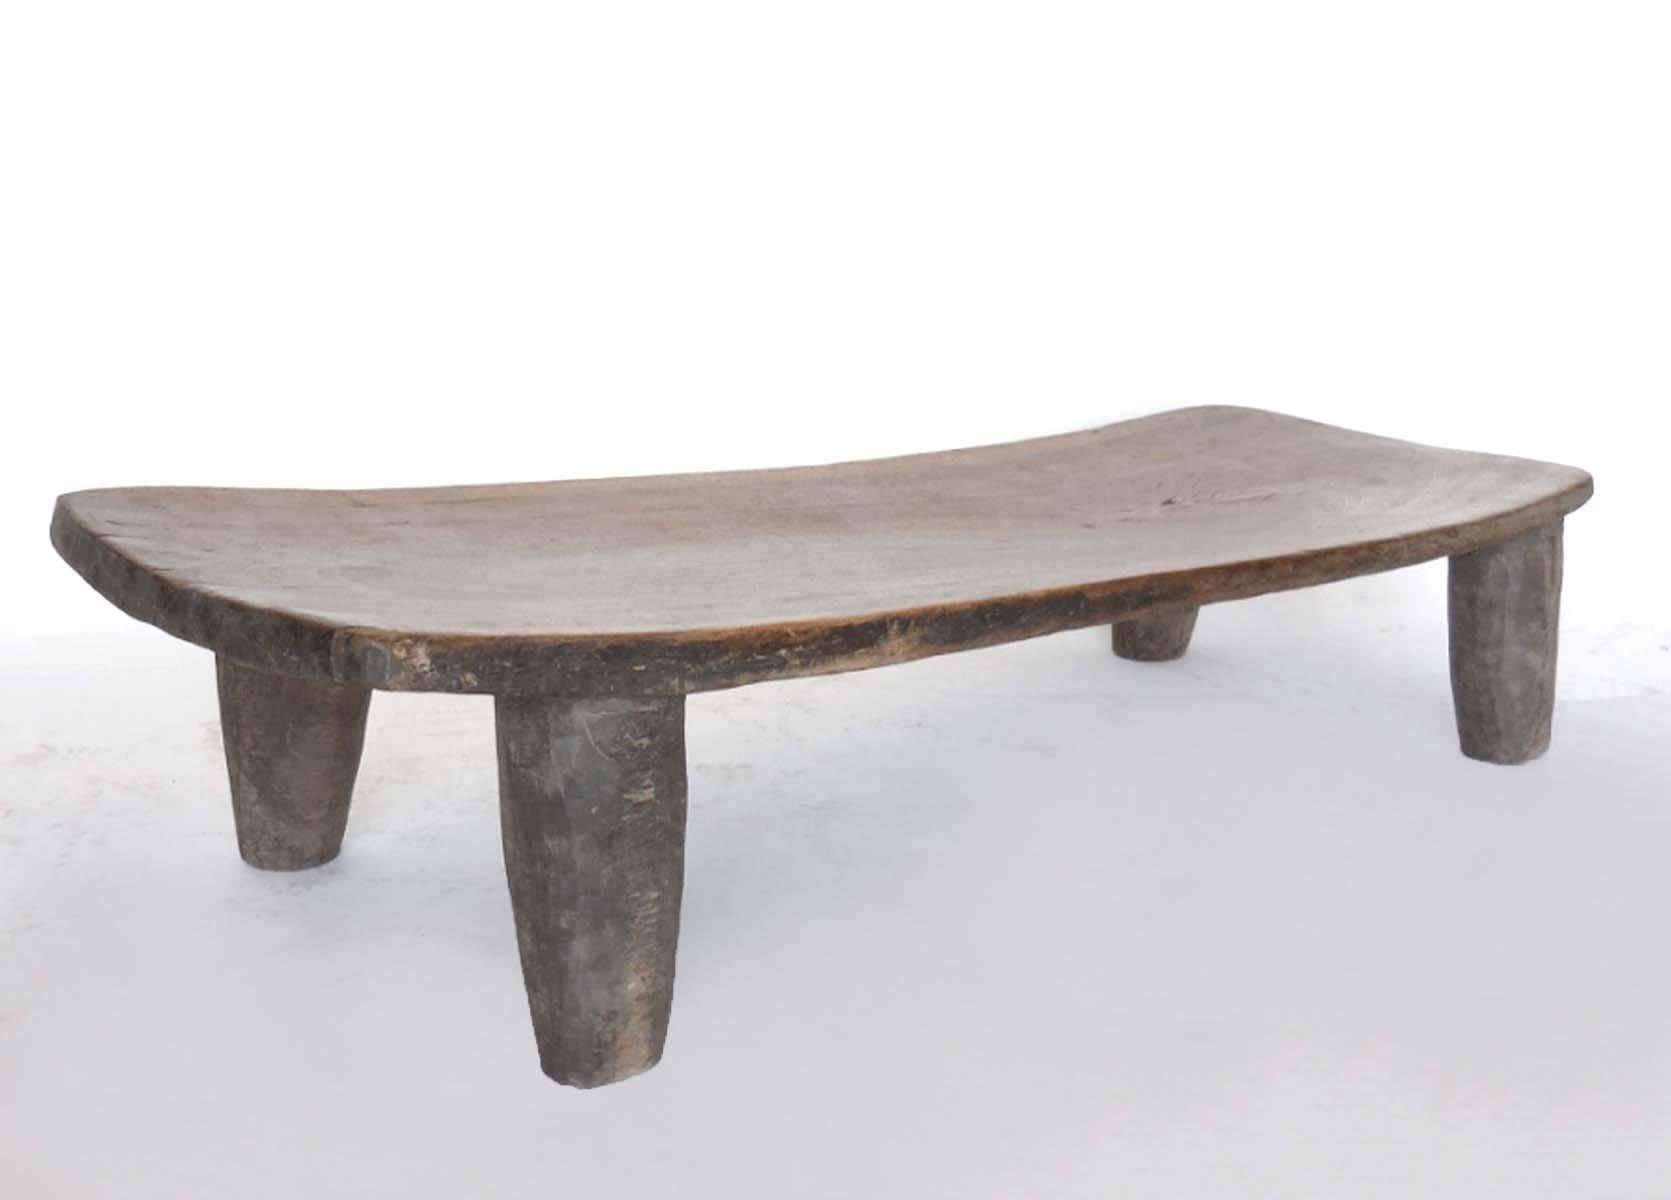 Carved from one piece of wood, this light colored early 20th century child's bed can be used as a petite coffee table or bench. The wooden top has lovely graining and patina and is one solid piece. Wear on the legs is commensurate with the age of